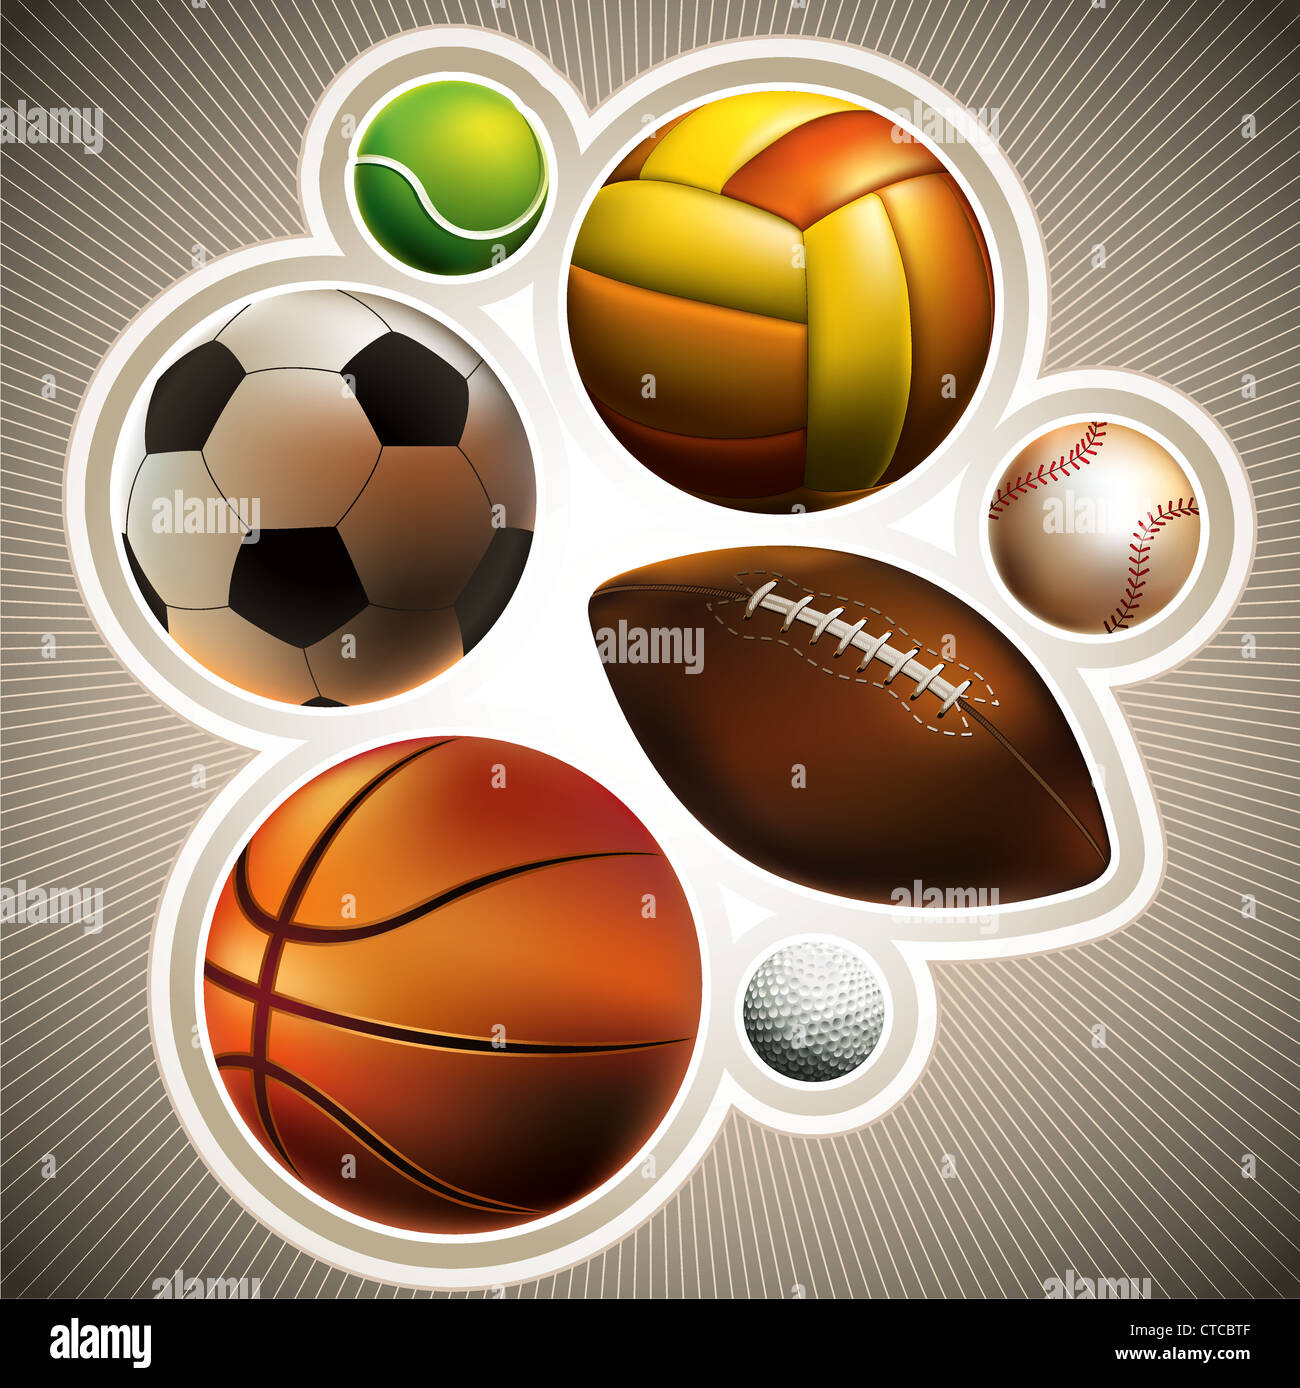 Composed set of different balls Stock Photo